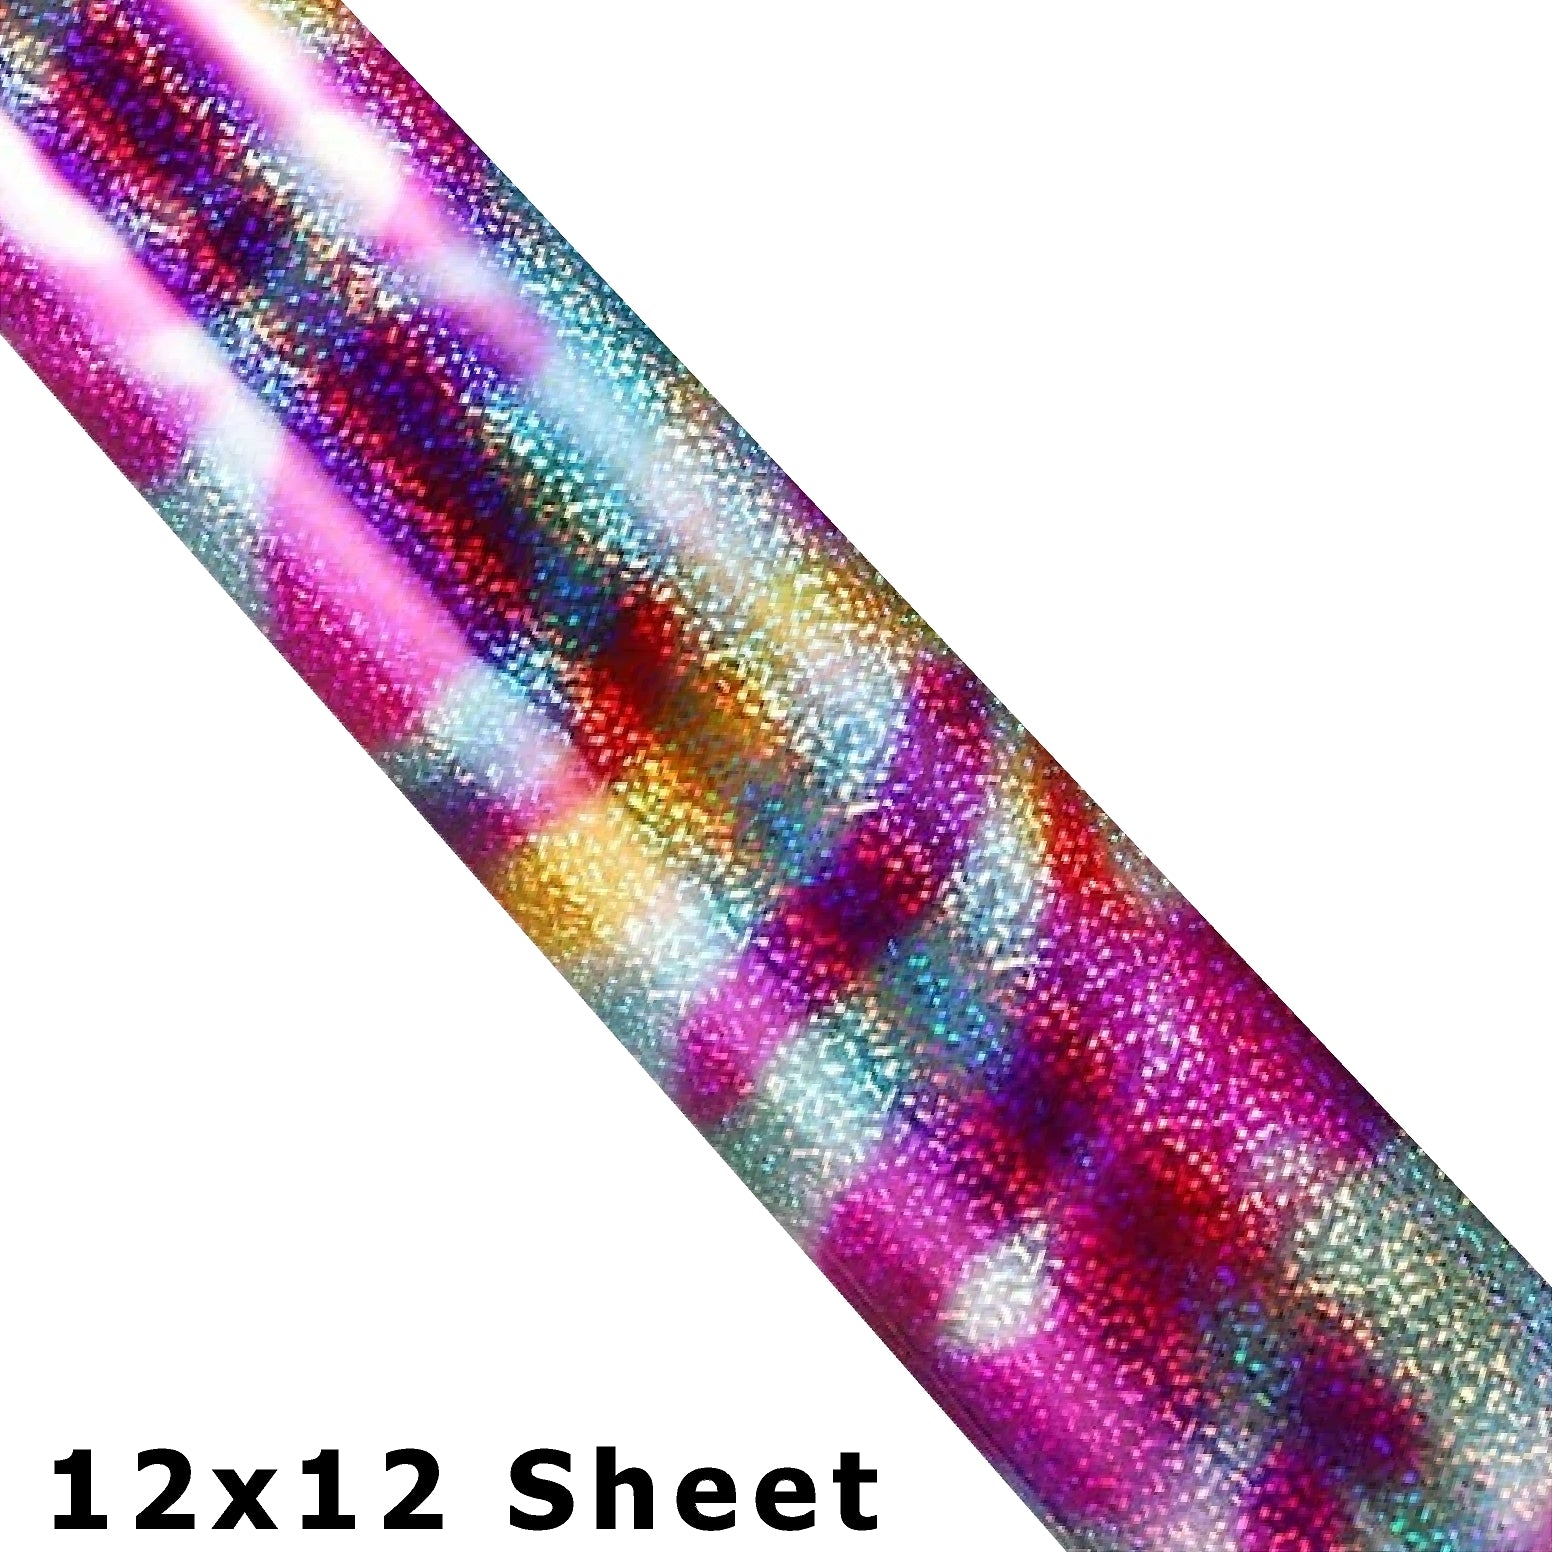 Aowvw Permanent Self-Adhesive Vinyl Pack Mixed Colorful Holographic Craft  Vinyl Plotte 